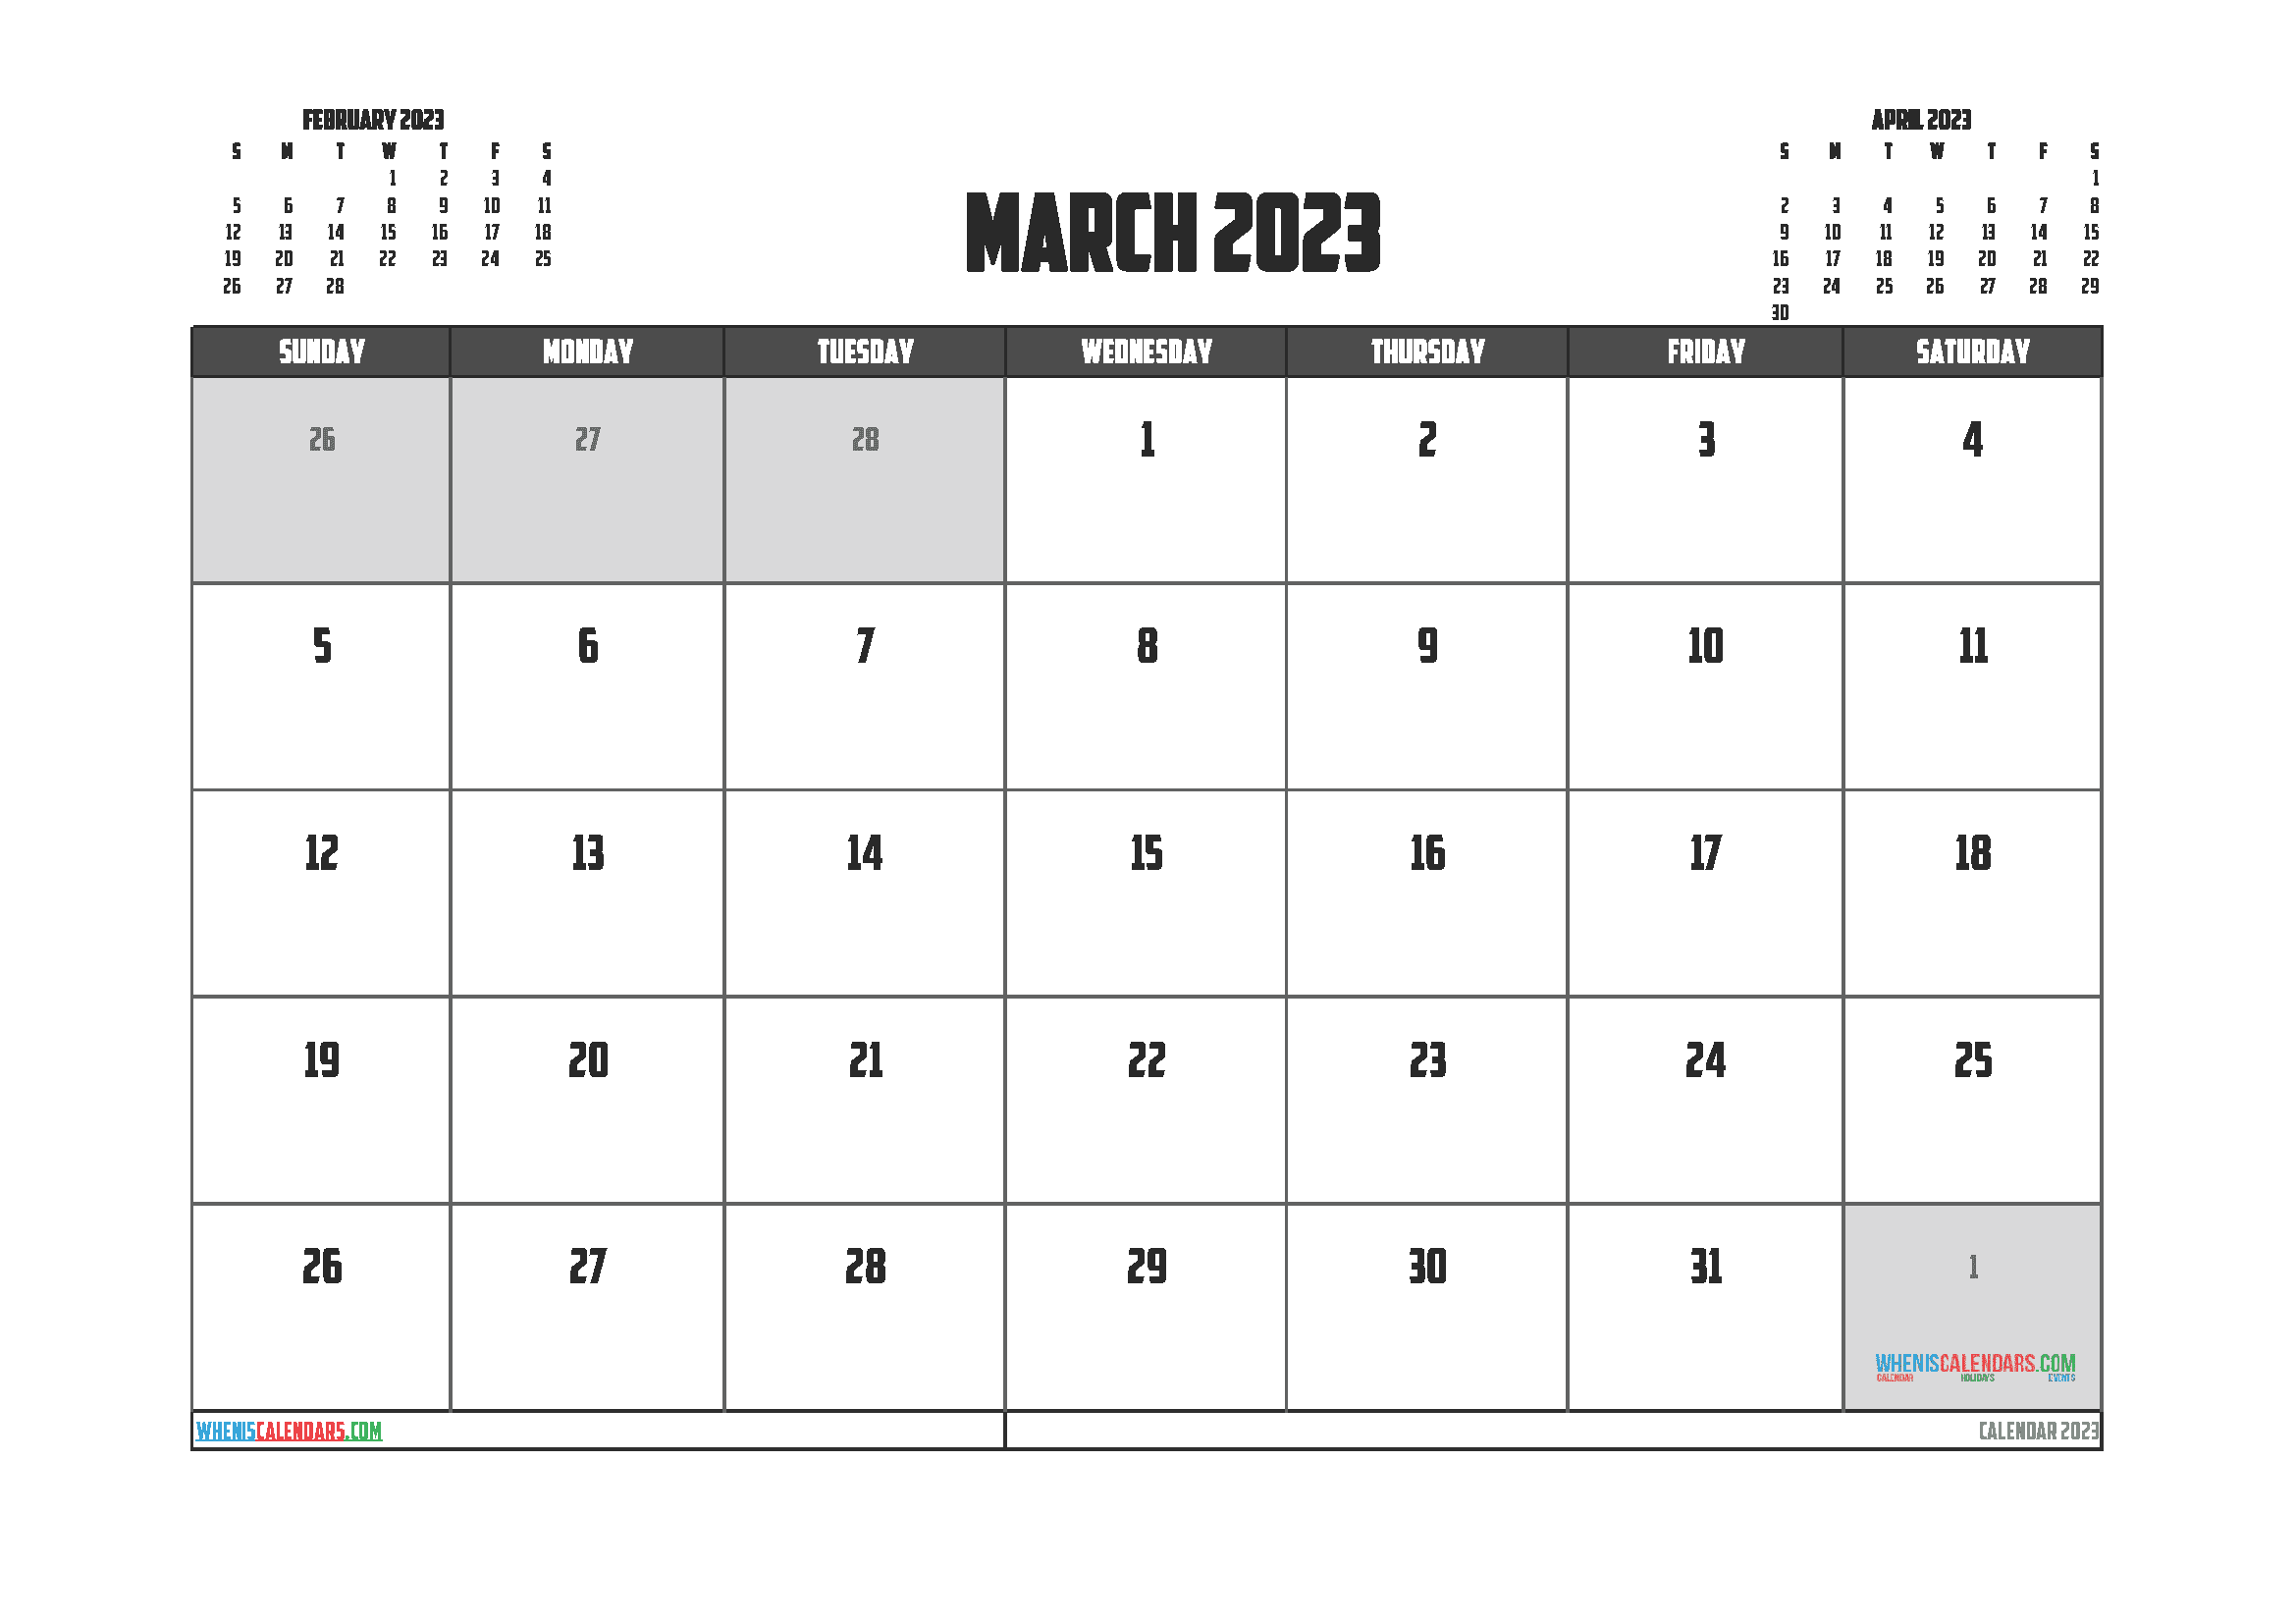 Free Calendar 2023 March with Holidays PDF in Landscape